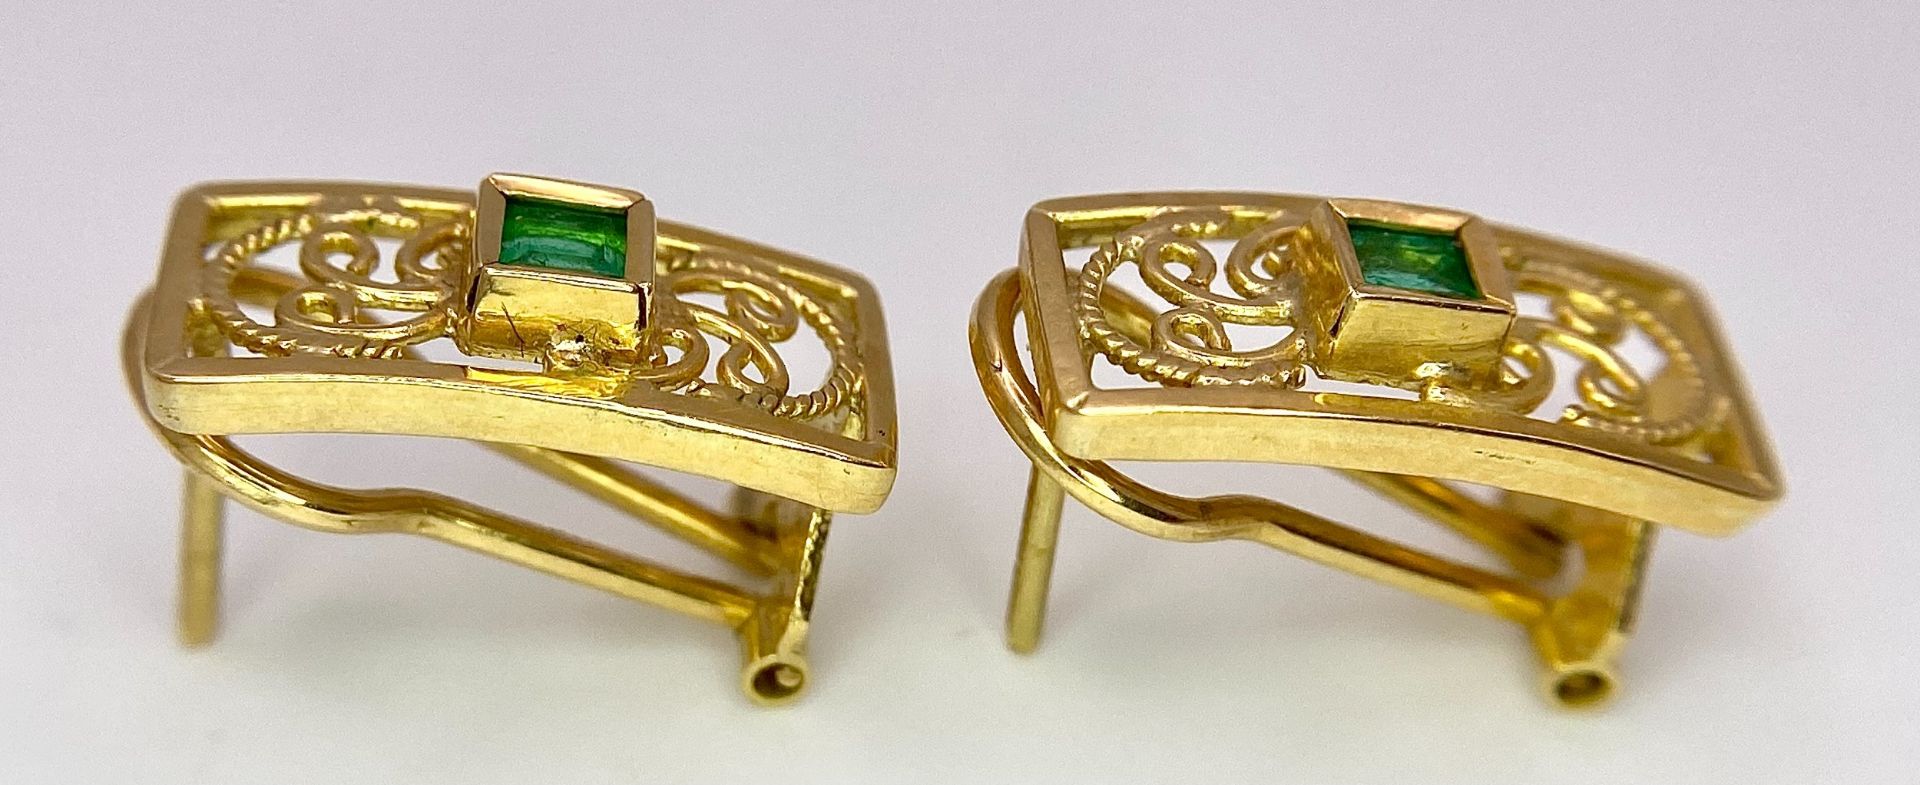 A Pair of 18K Yellow Gold and Emerald Earrings. Clip clasp with pierced decoration. 17mm. 3.9g total - Bild 3 aus 7